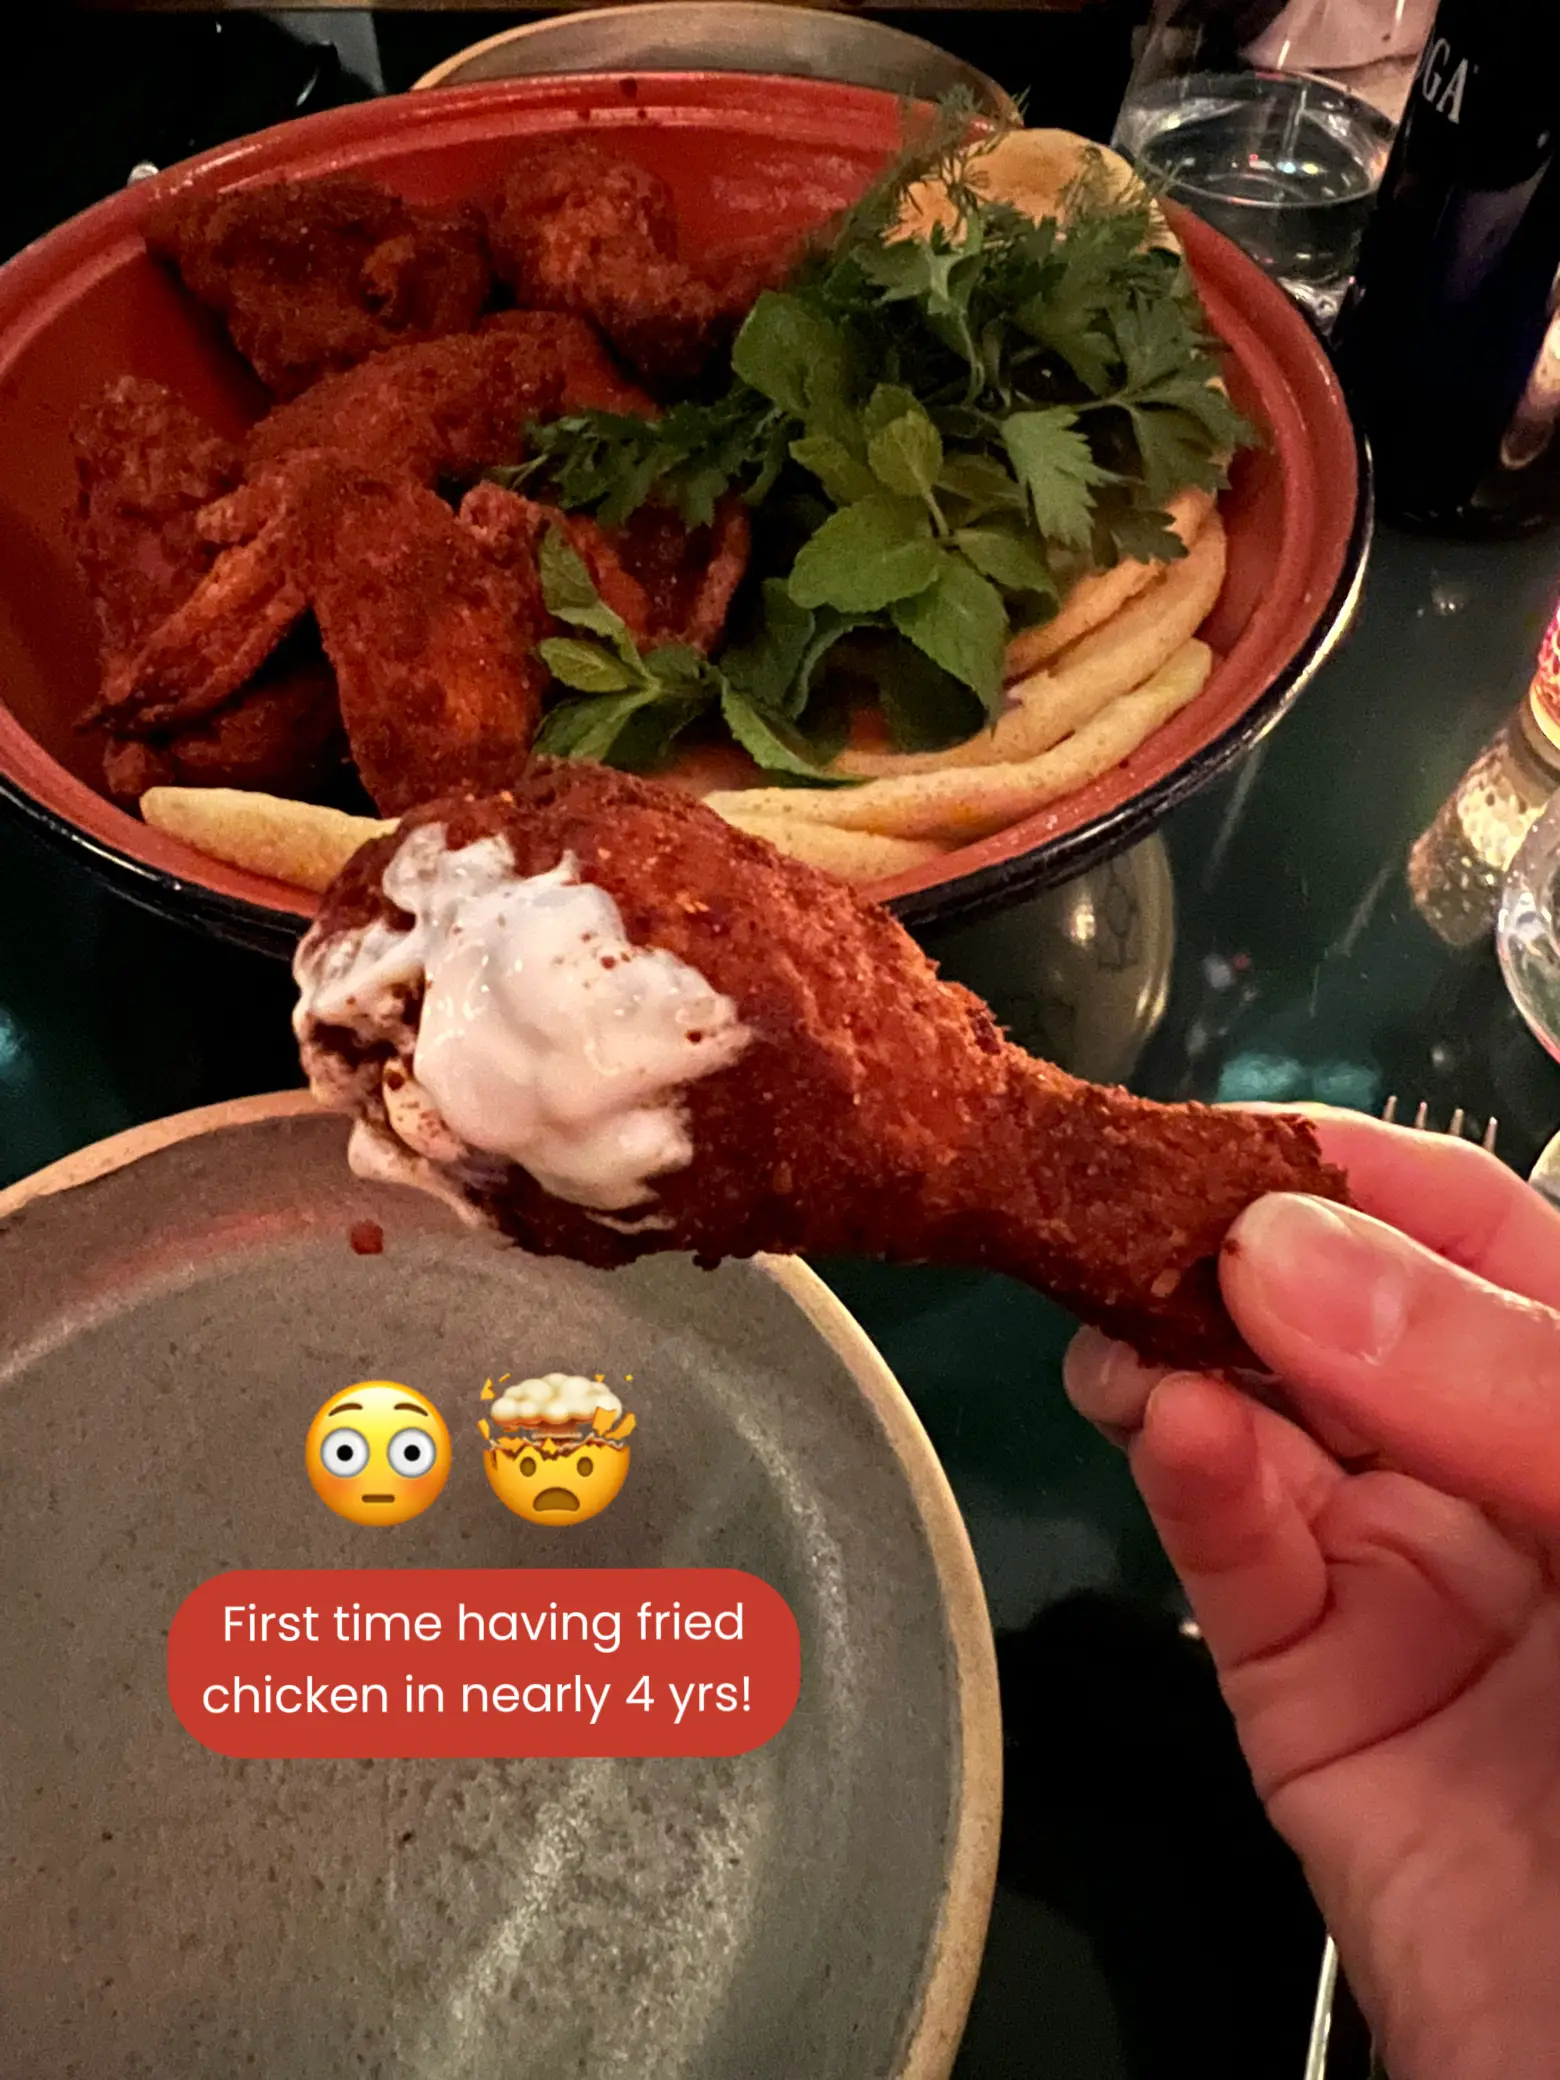  A person is holding a piece of fried chicken in their hand.